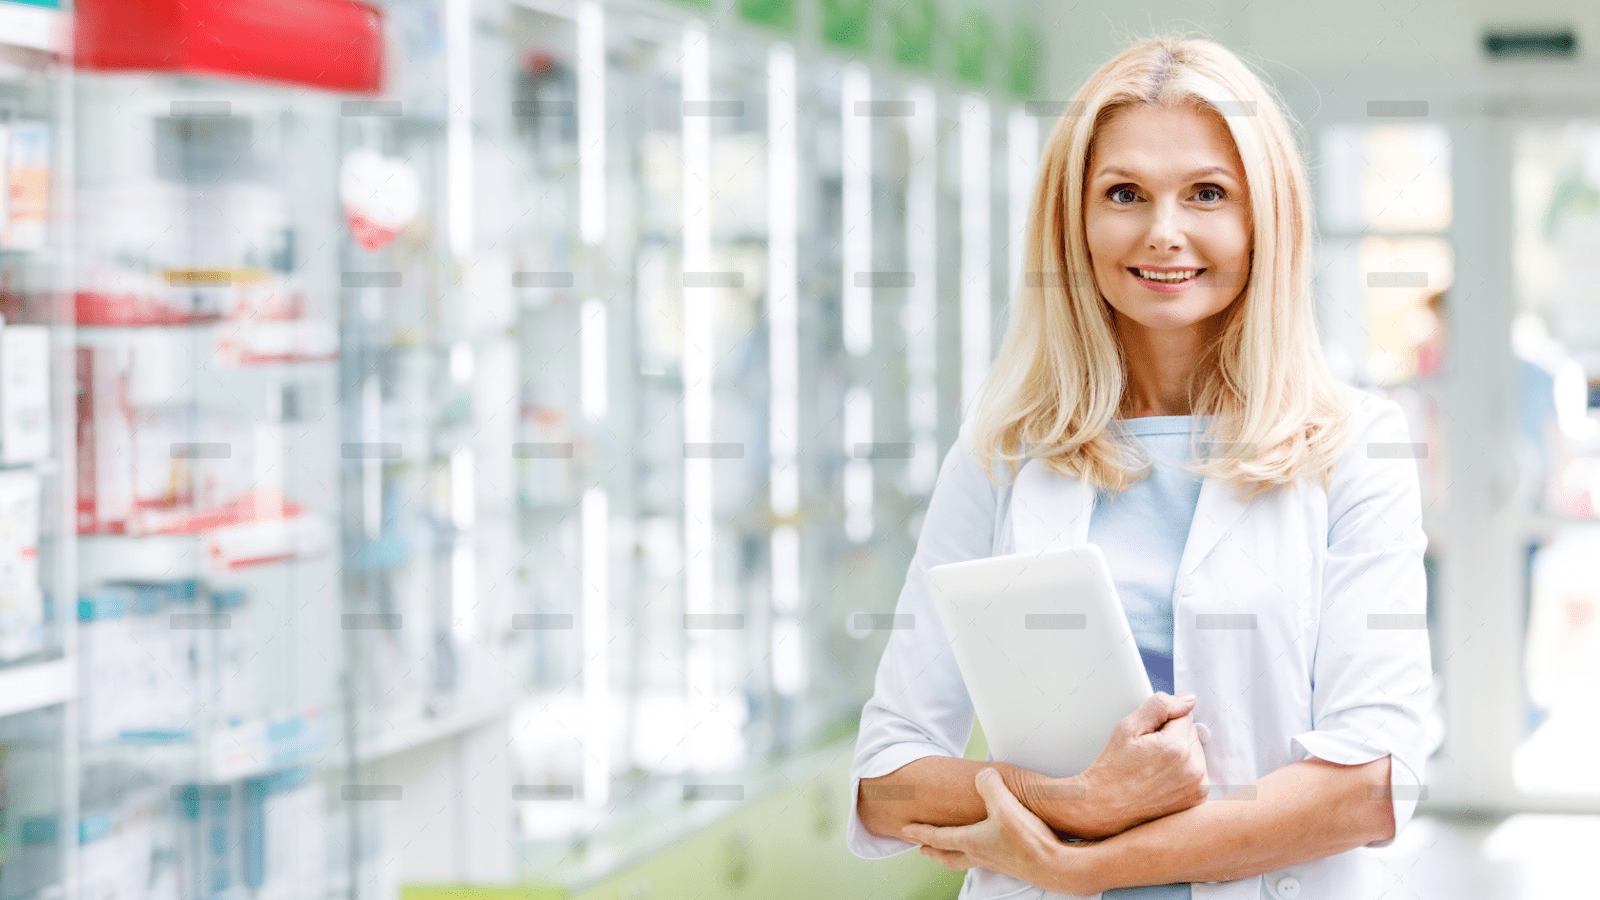 demo-attachment-1175-cheerful-pharmacist-holding-digital-tablet-and-smi-98L5GF6-1